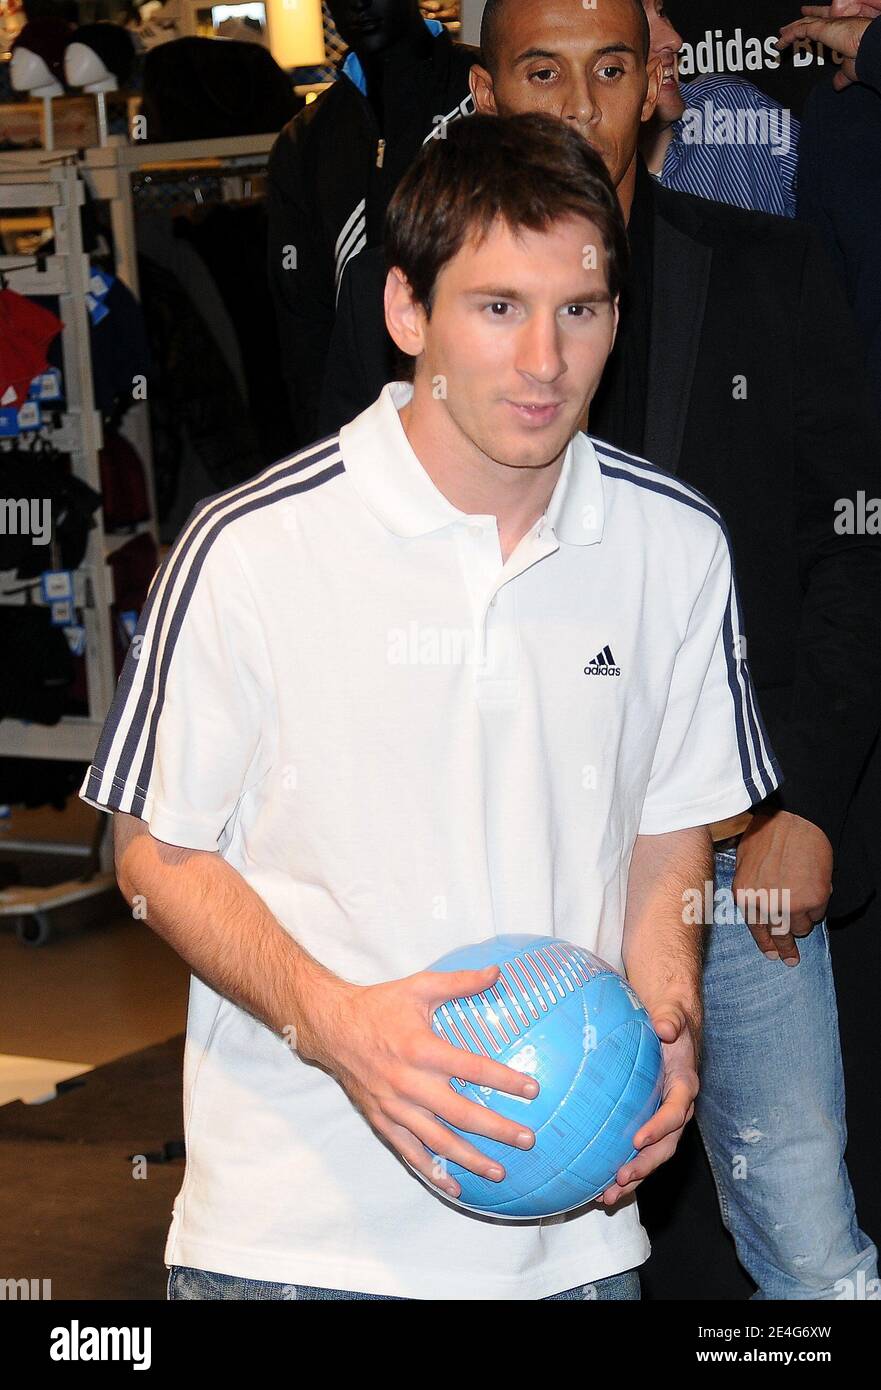 Lionel Messi, Argentinian football player of FC Barcelona during a  dedication session at a sponsor shop Adidas on the Champs Elysees in Paris,  France on October 27, 2009. Lionel Messi is one